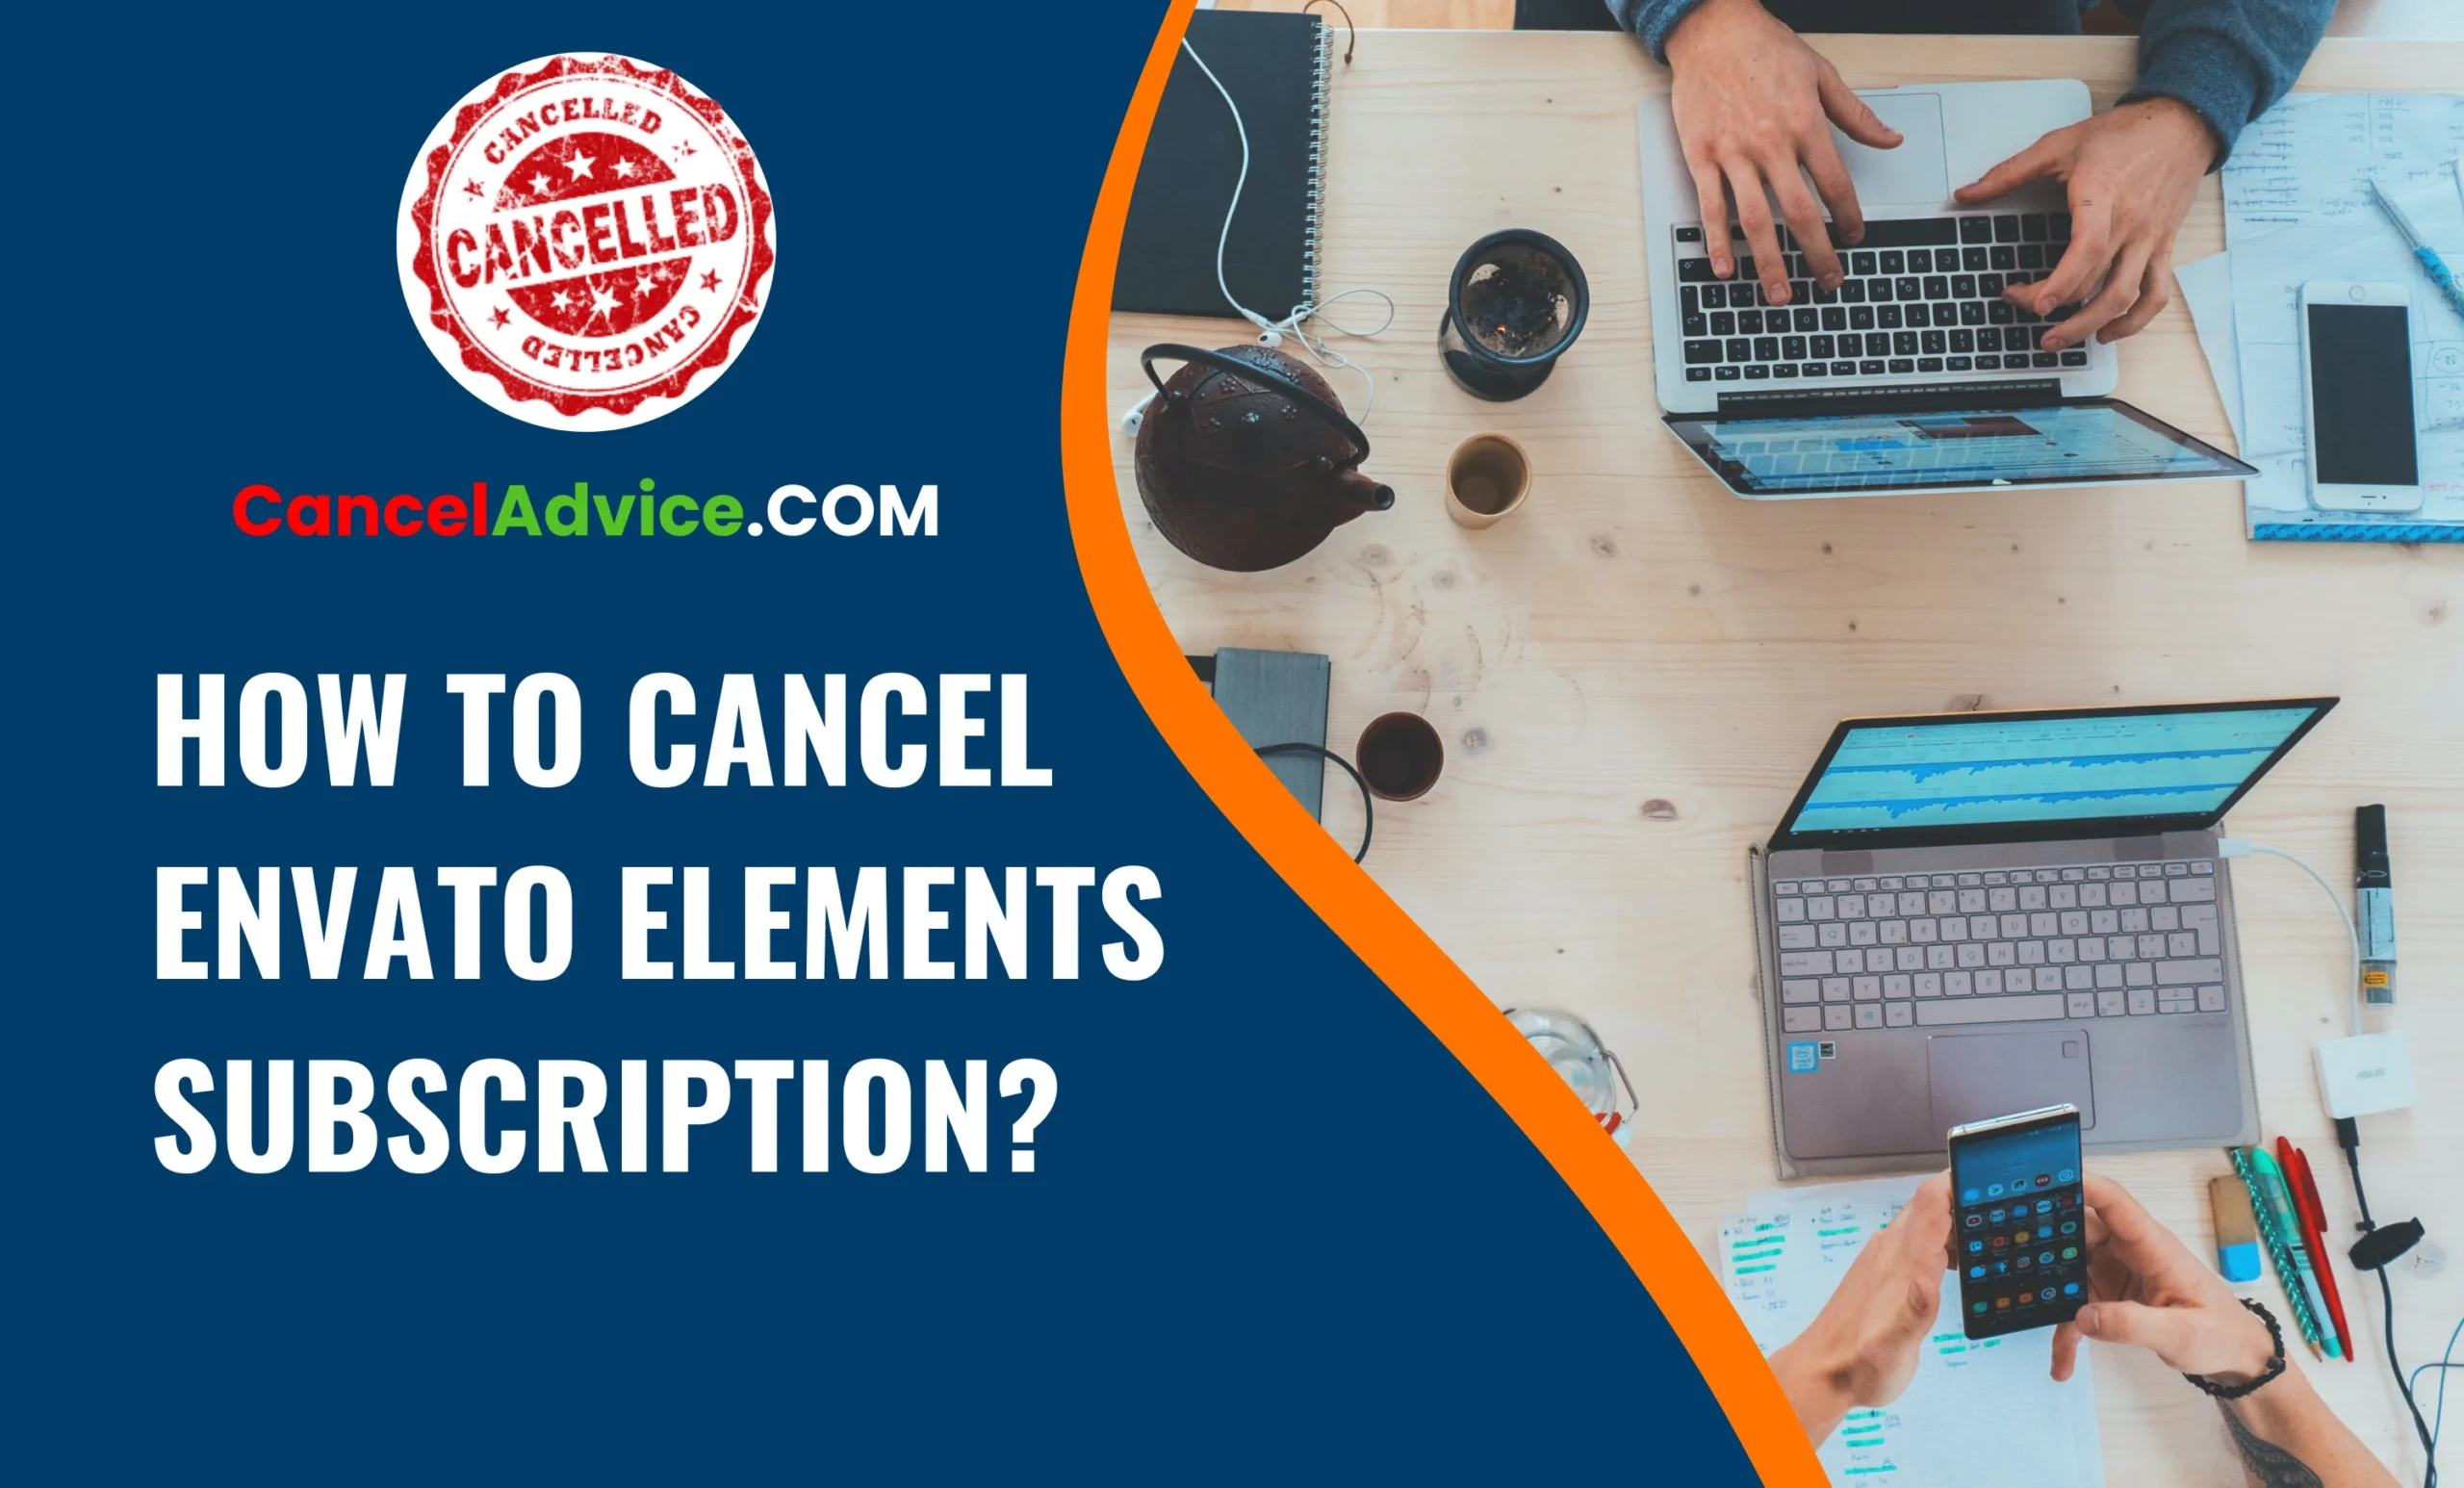 How To Cancel Envato Elements Subscription